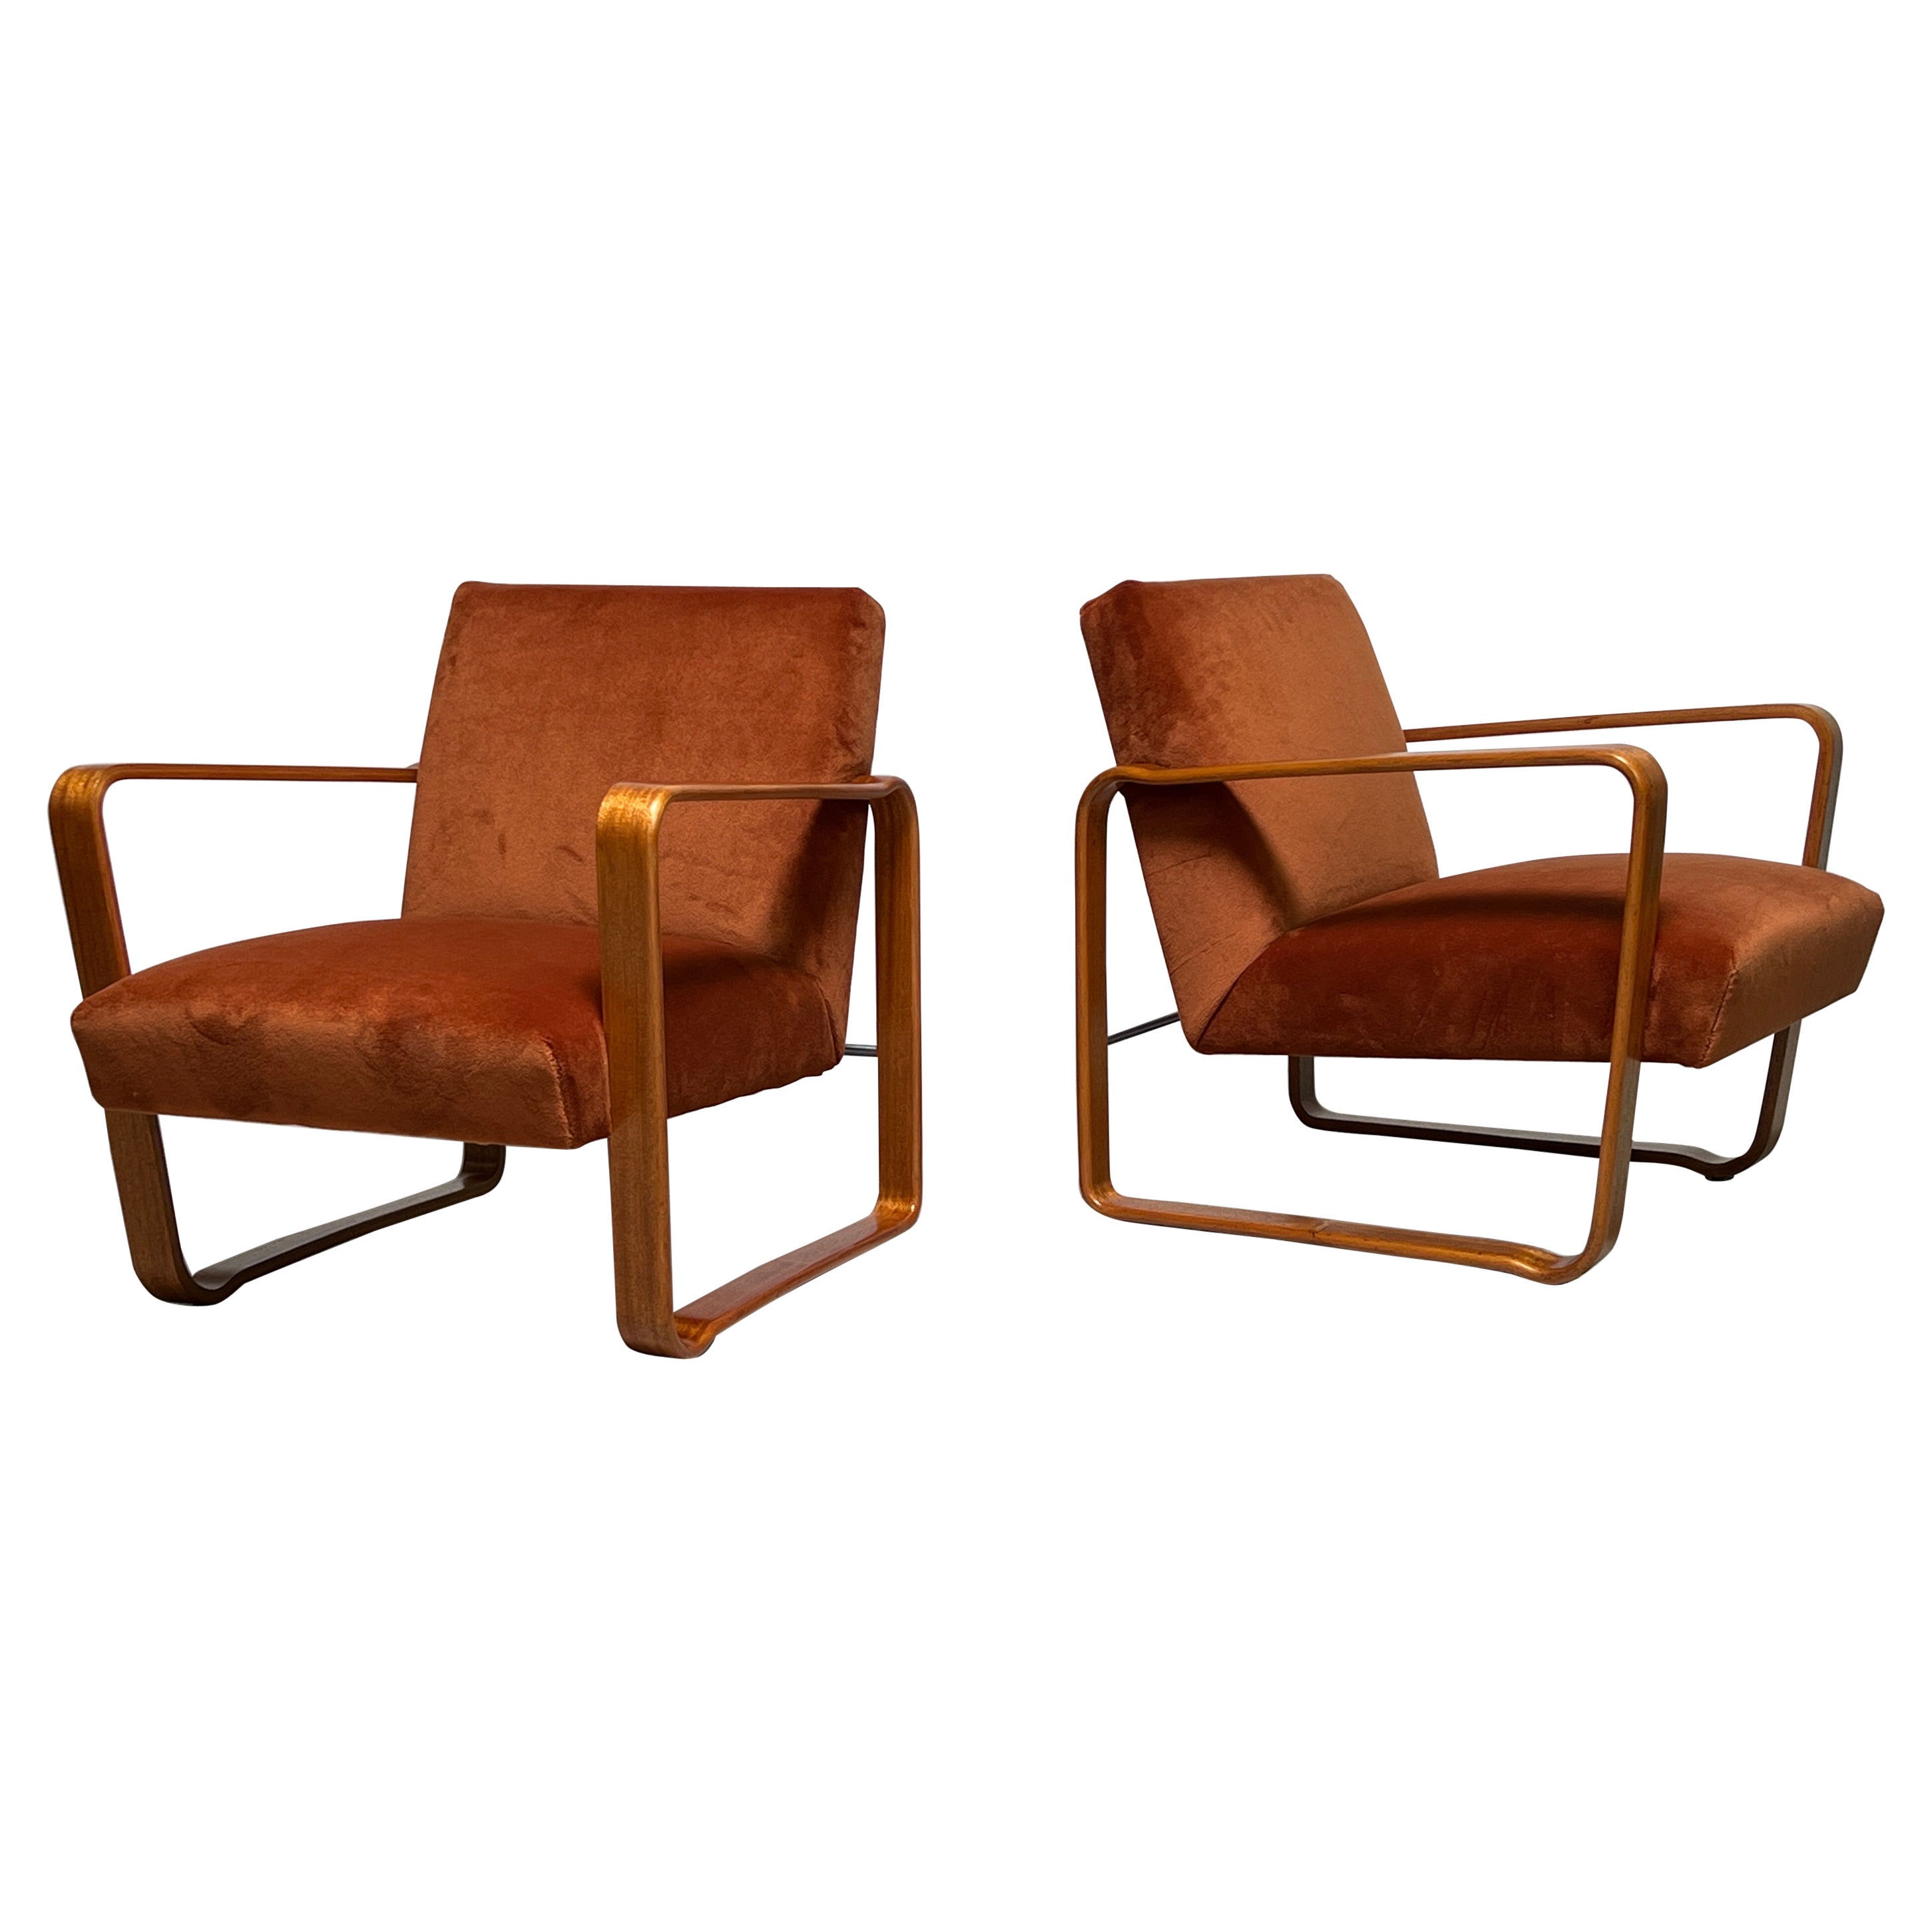 Pair of Tank Chairs by Edward Wormley for Dunbar